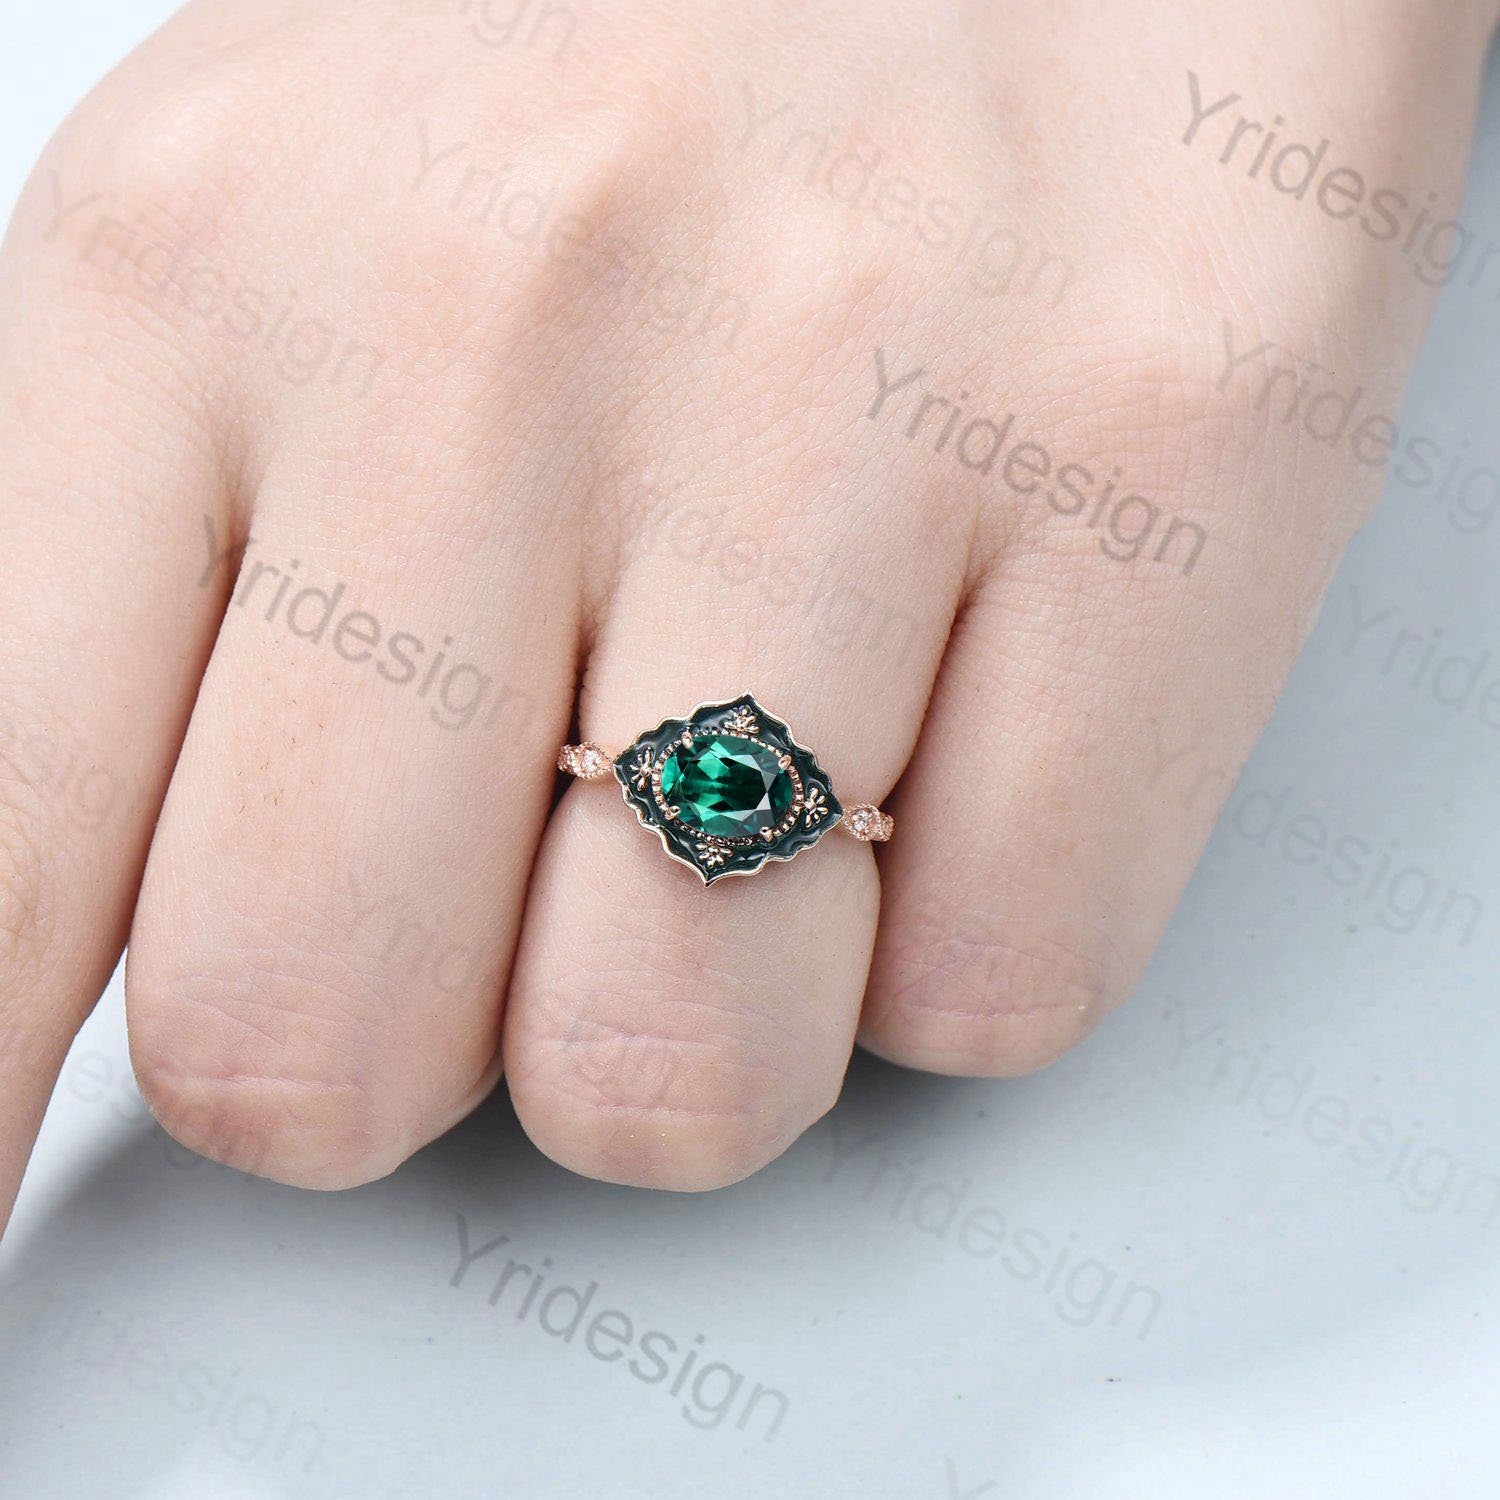 Vintage Emerald Engagement Ring Unique Enamel Green Crystal Wedding Ring Women Solid Yellow Gold Art Deco Antique Anniversary Gift For Her - PENFINE